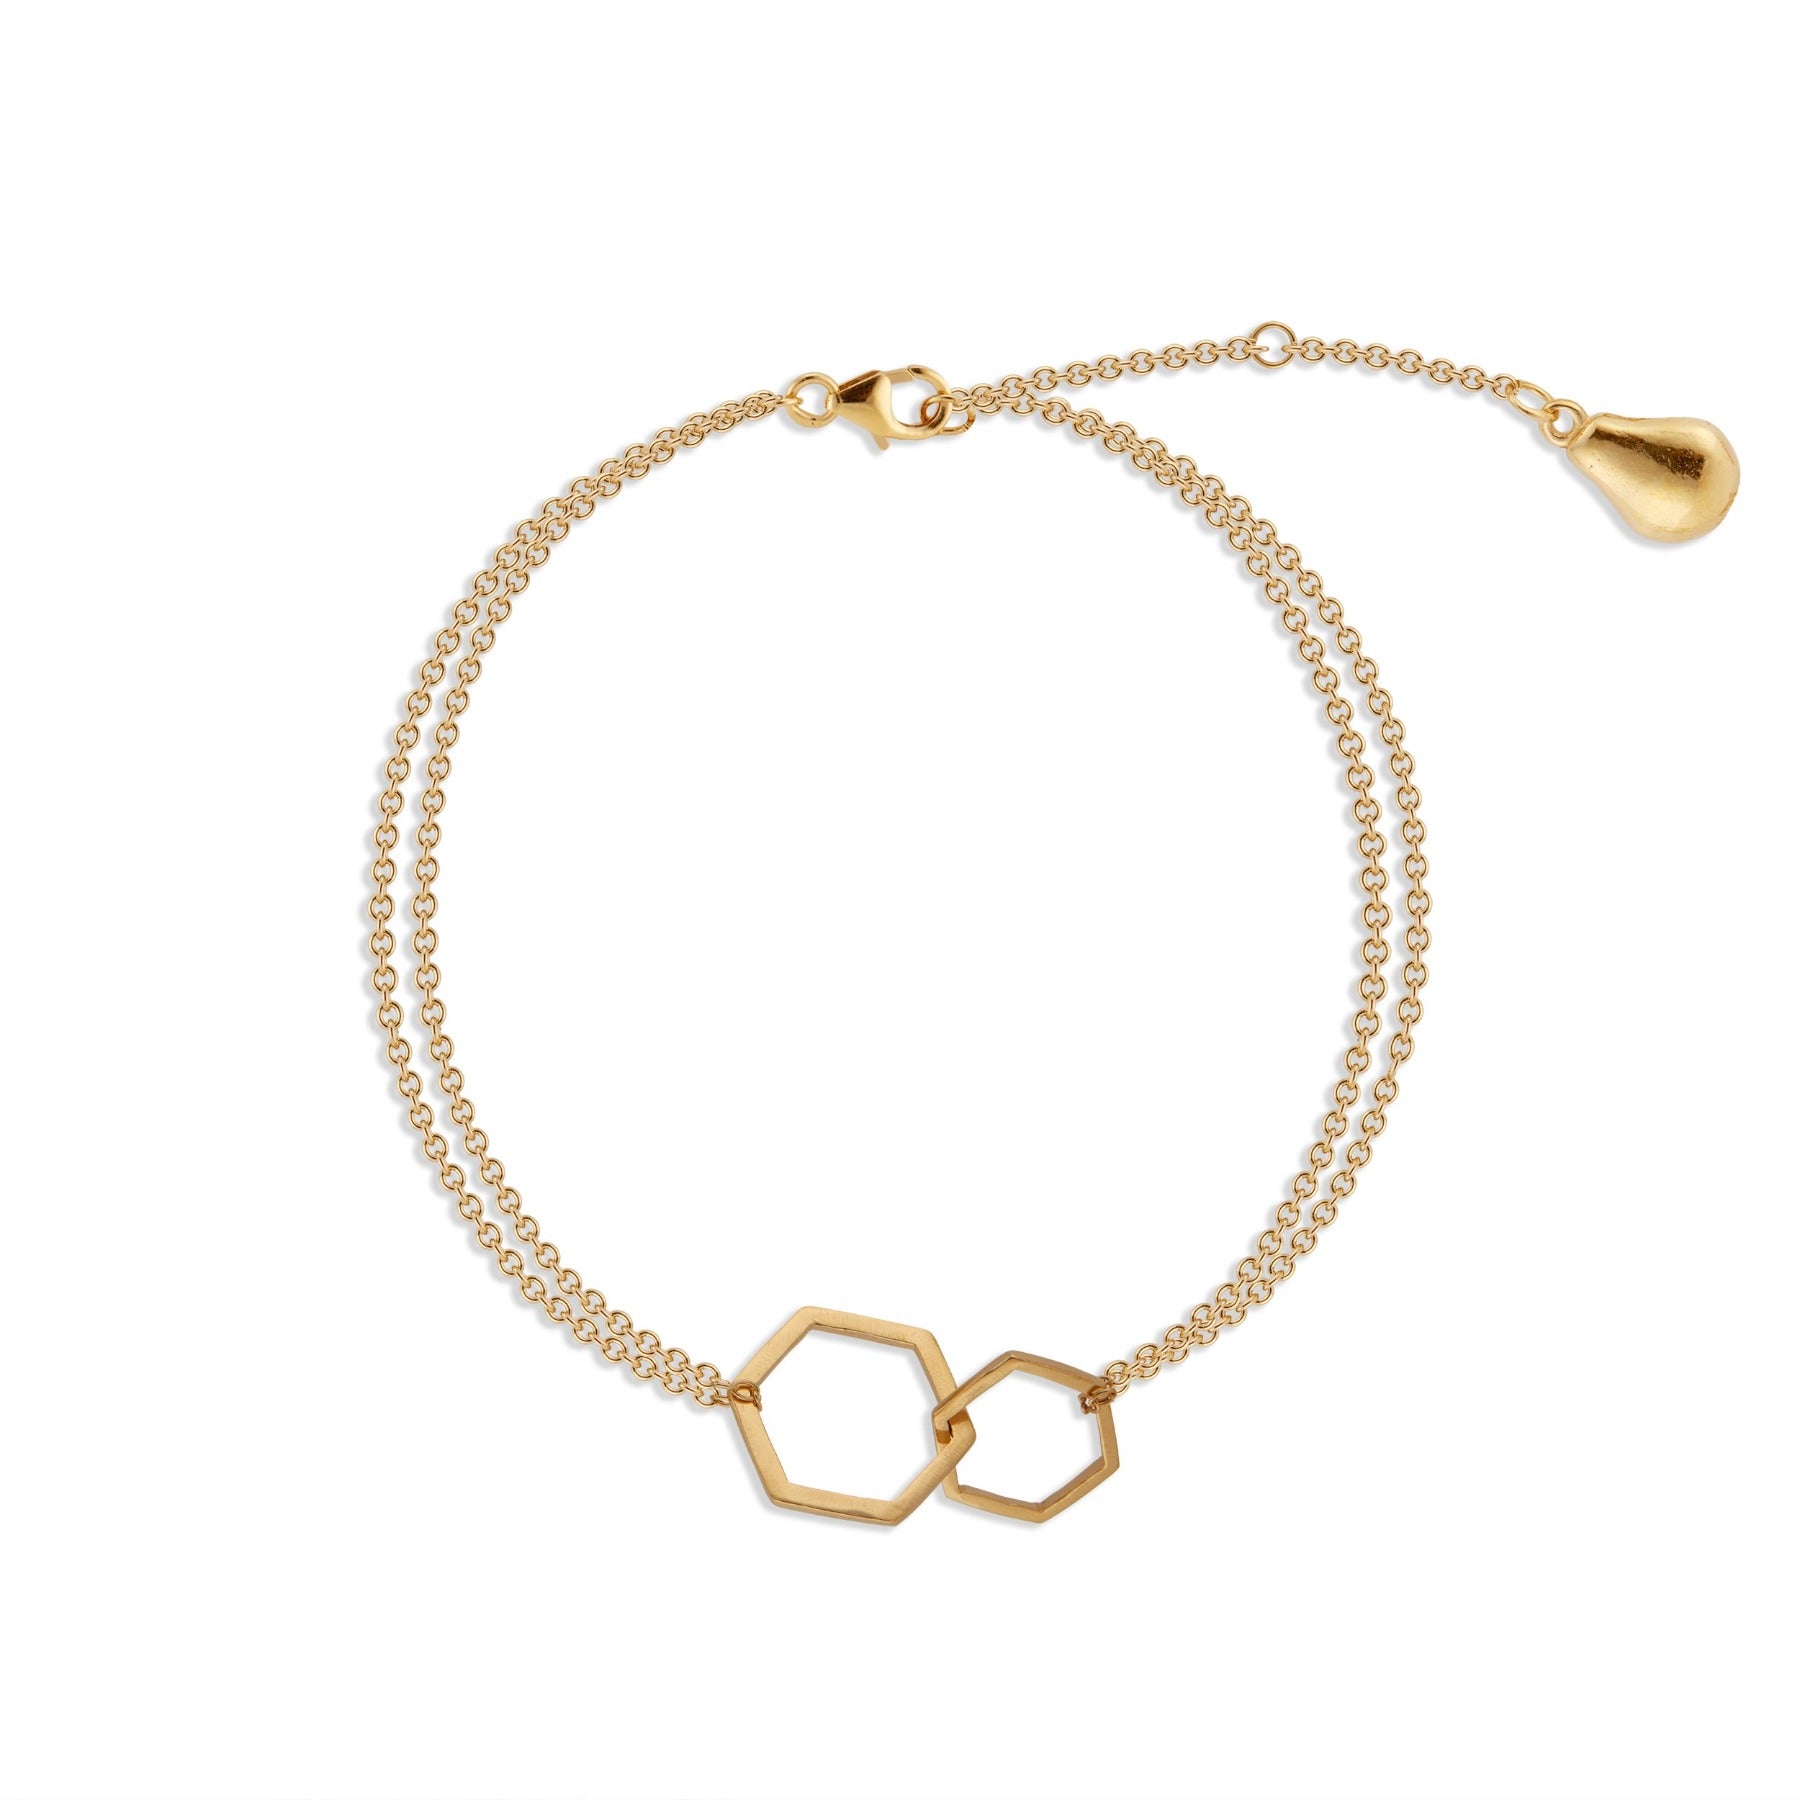 Distressed interlocking geometric hexagons with delicate chain bracelet with gold pear charm in 18k gold vermeil.